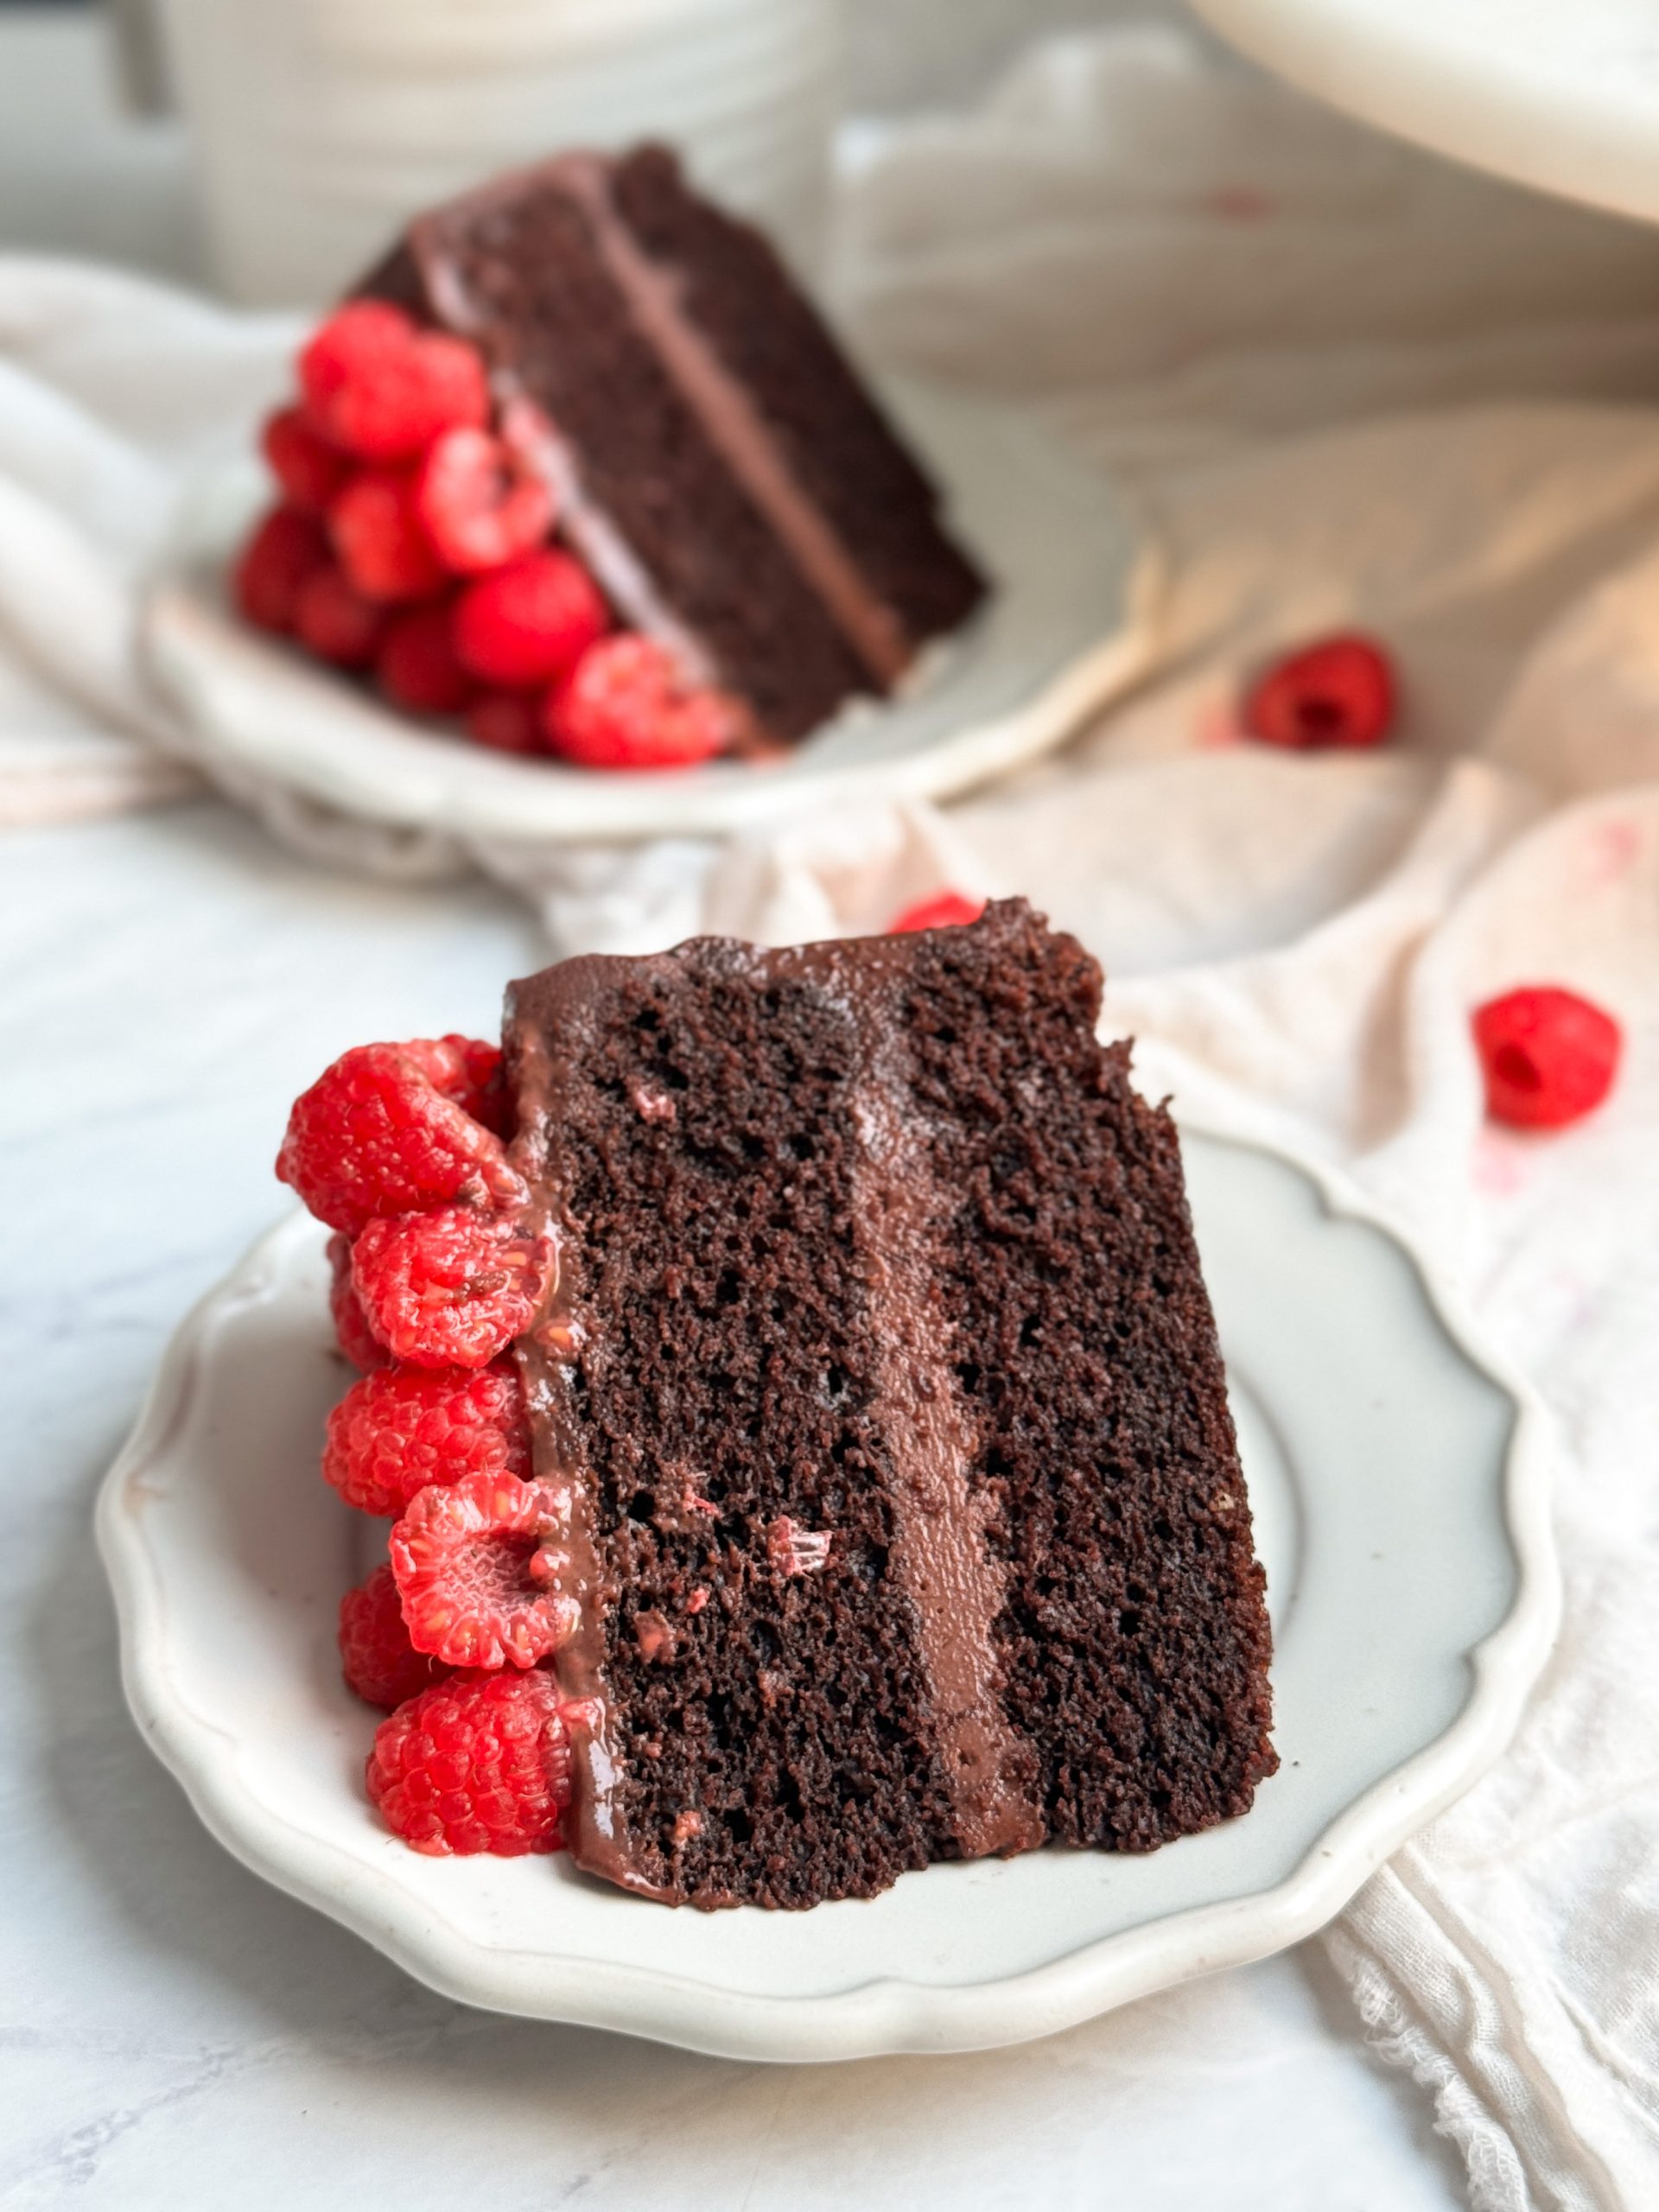 A slice of chocolate raspberry fudge cake on a small plate. cake has 2 layers of moist chocolate cake, ganache in between and on top, and is decorated with raspberries. Another slice seen in the background